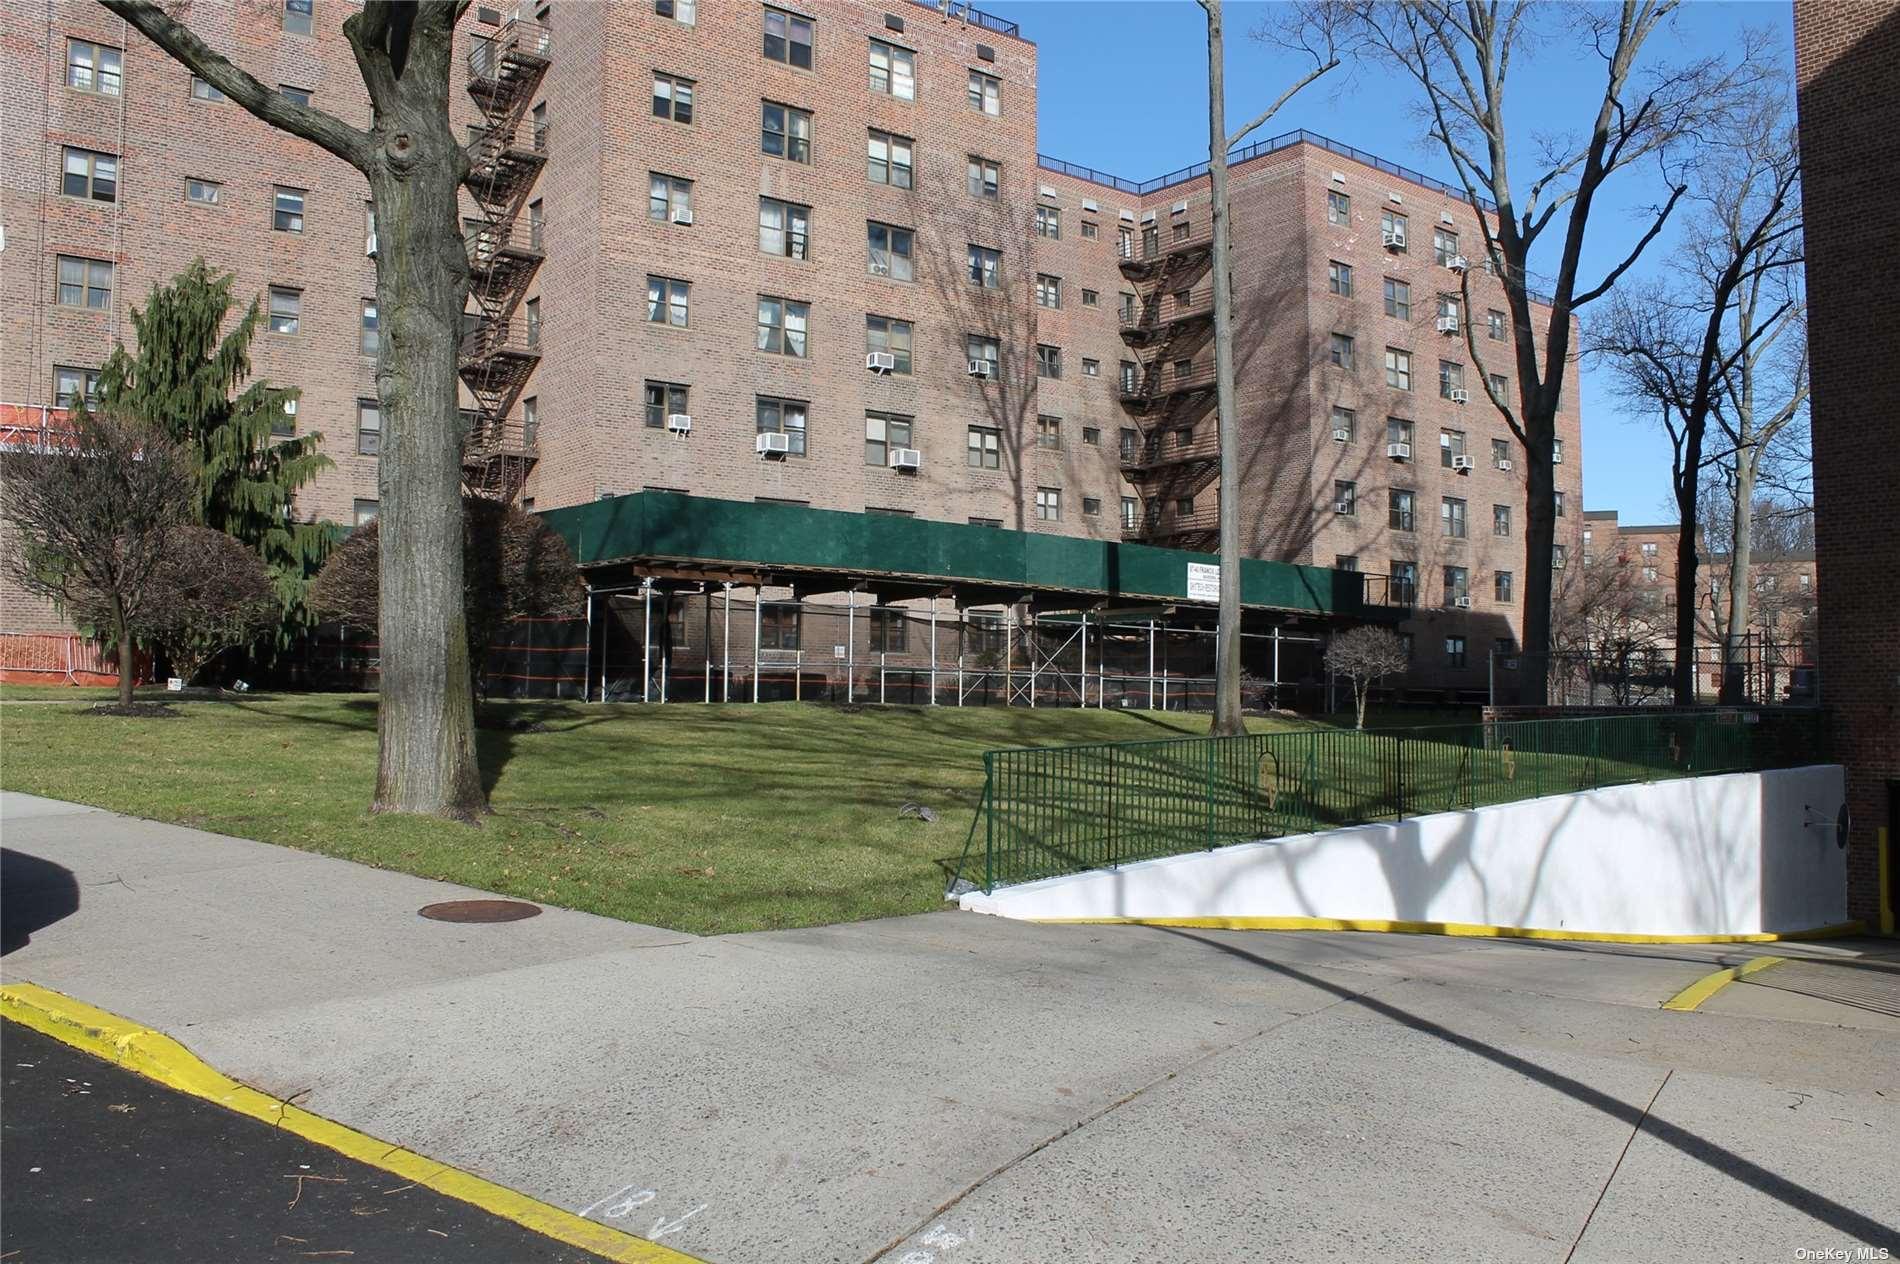 87-40 Francis Lewis B Boulevard #A57 in Queens, Queens Village, NY 11427